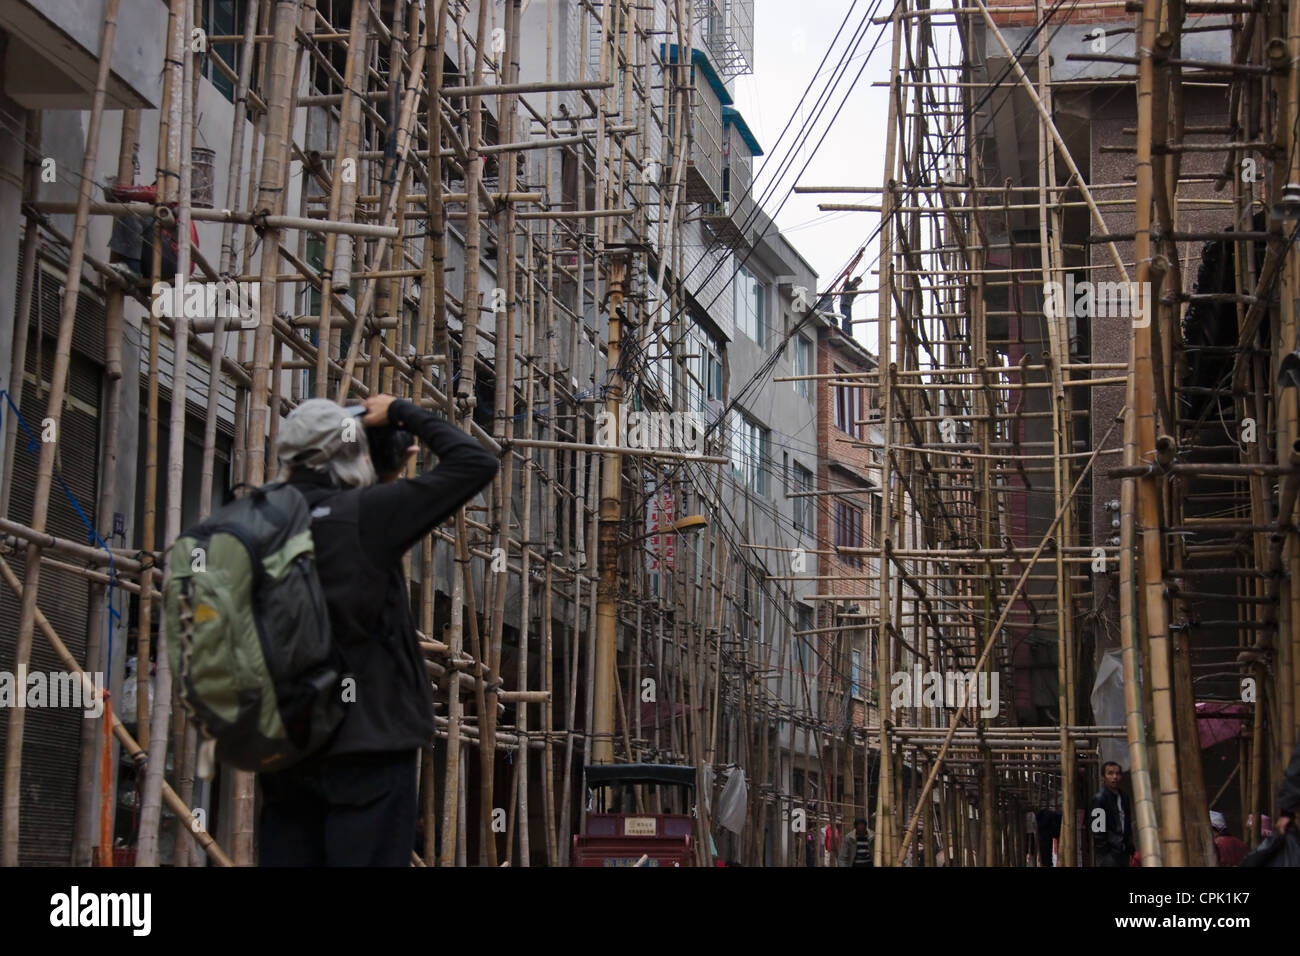 Tourist photographing bamboo scaffolding at a construction site, Kaili, Guizhou, China Stock Photo